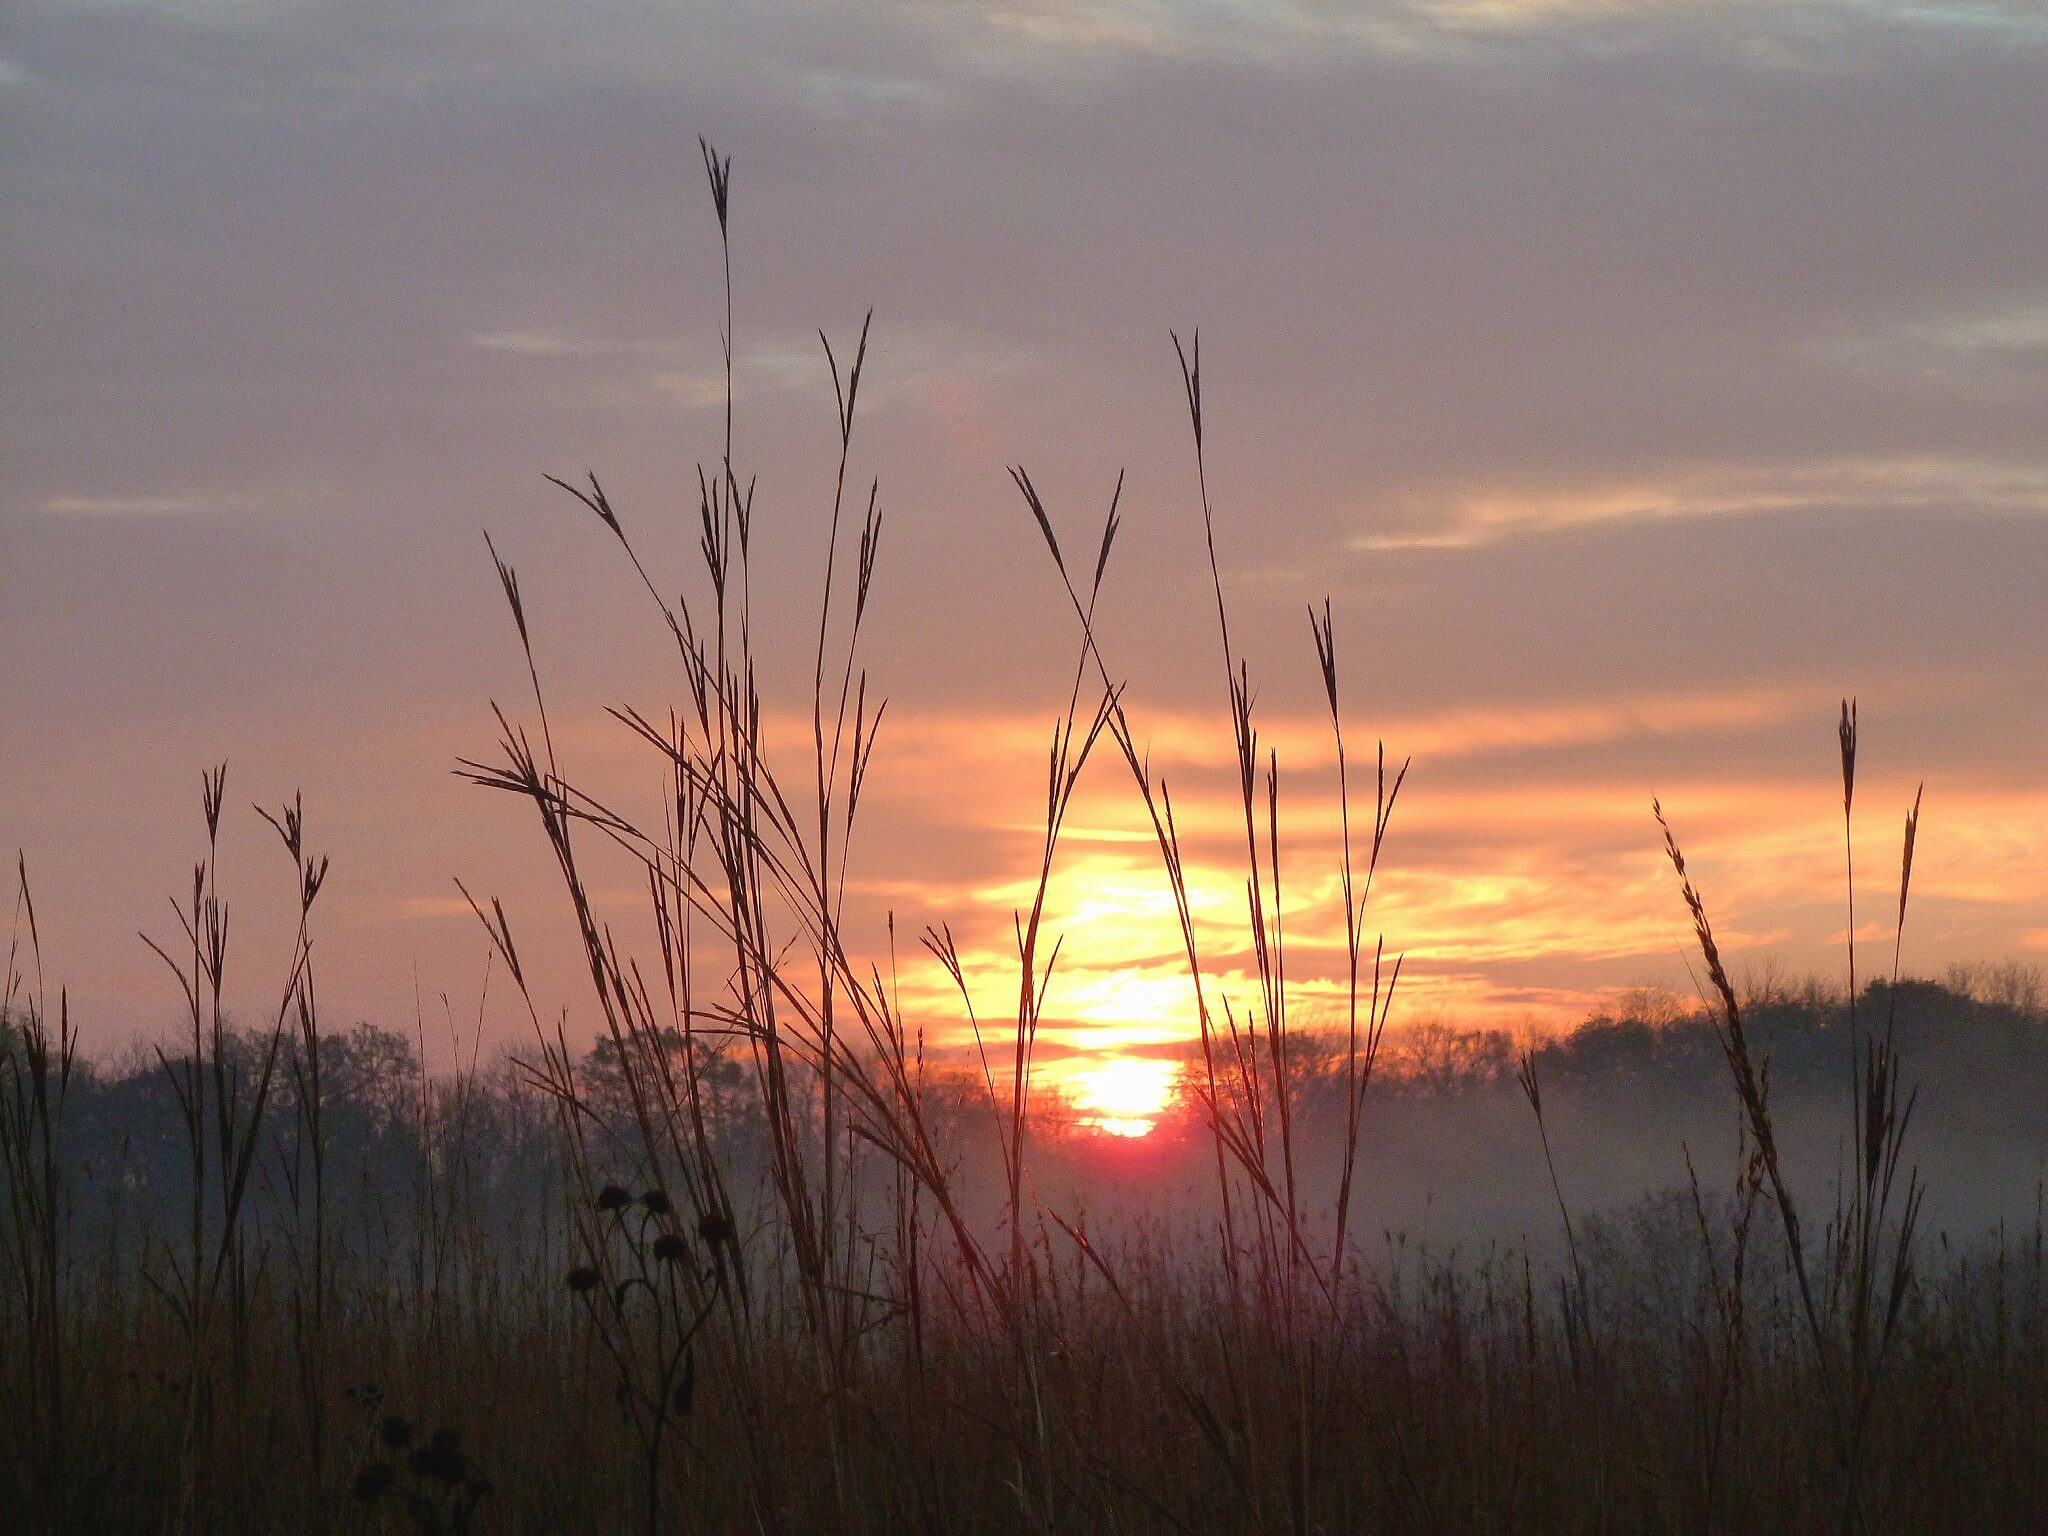 Sunrise at a marsh with the soft orange glow of the morning sun peeking out over treetops and prairie grasses.